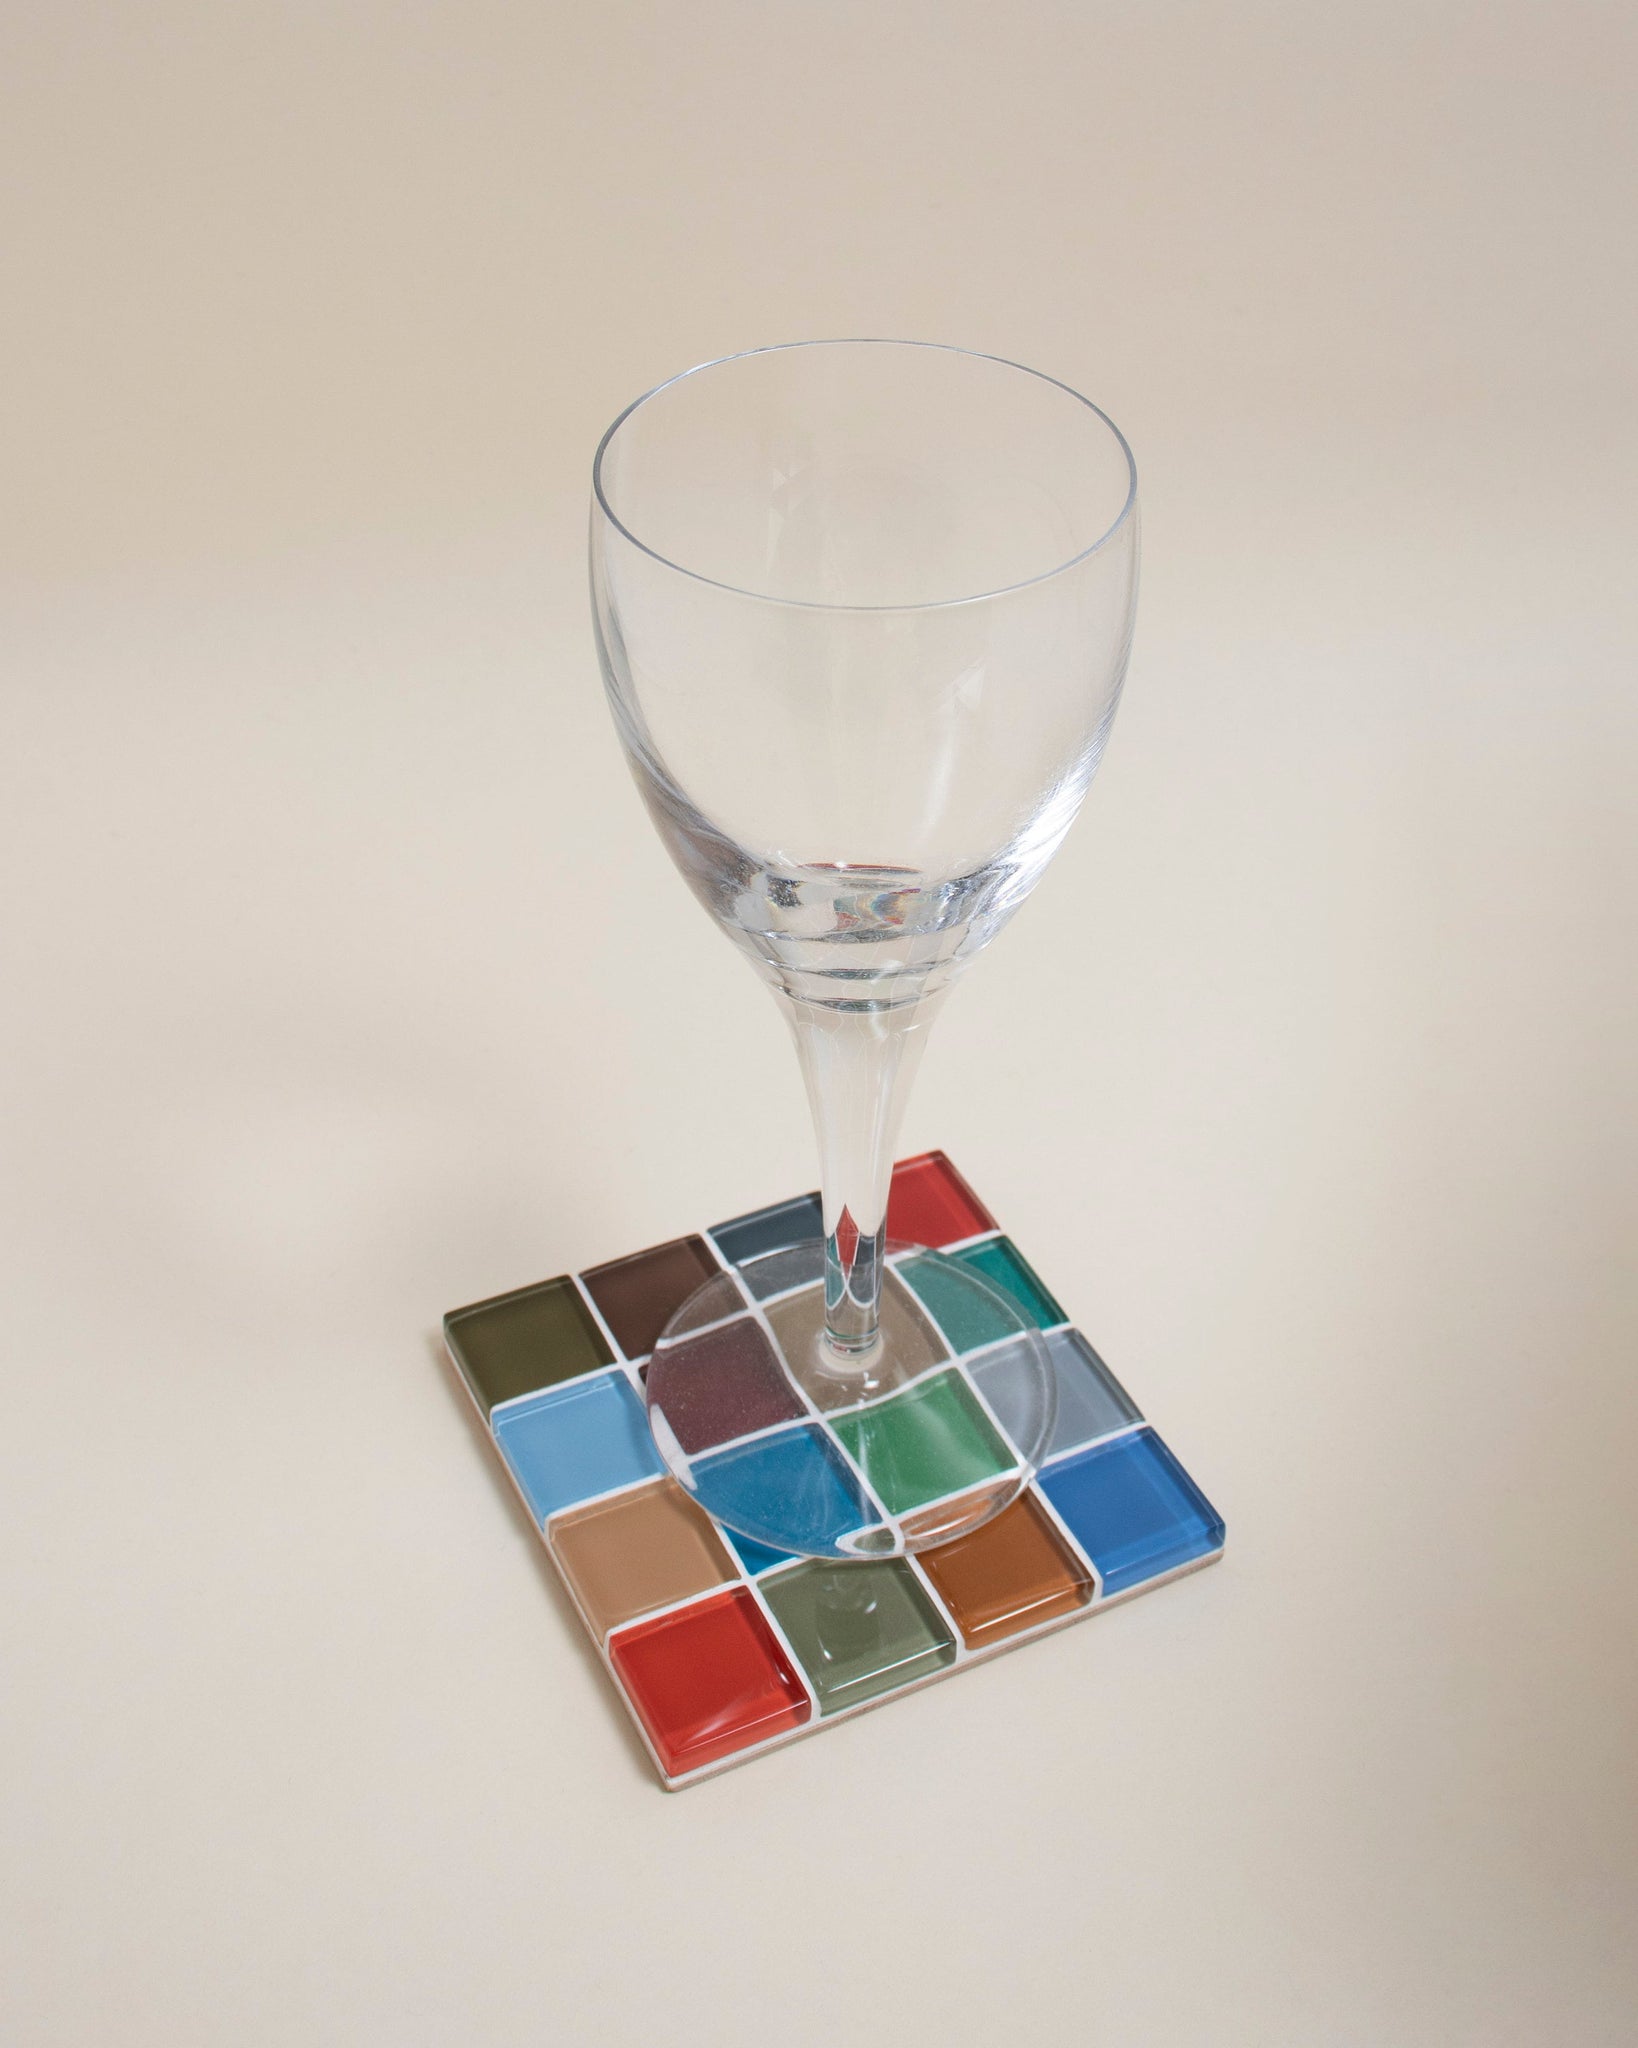 Checkered Glass Tile Coaster | Handmade Drink Coaster | Square Coaster | Housewarming Gift | Gift for Her | Gift for Him | Valentine Gift